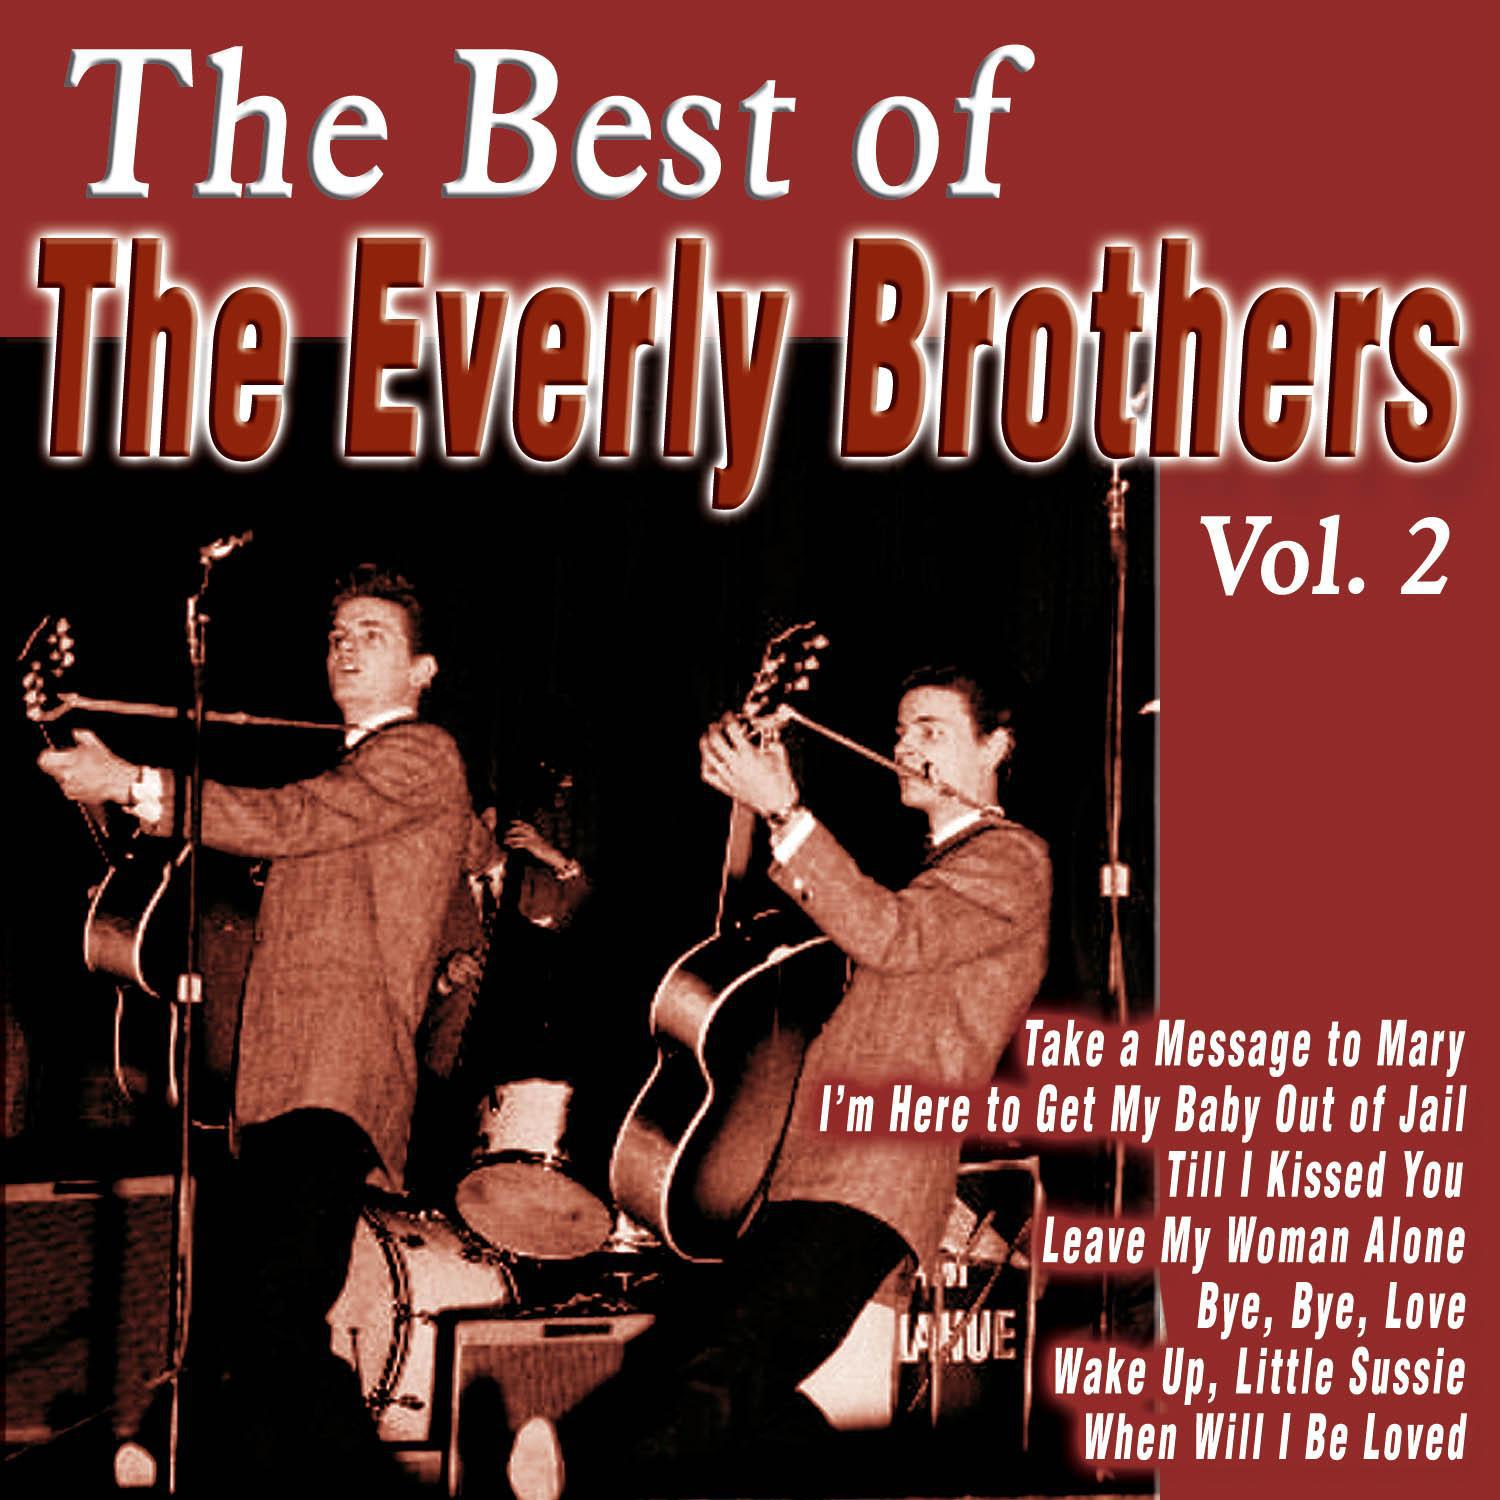 The Best of the Everly Brothers Vol. 2